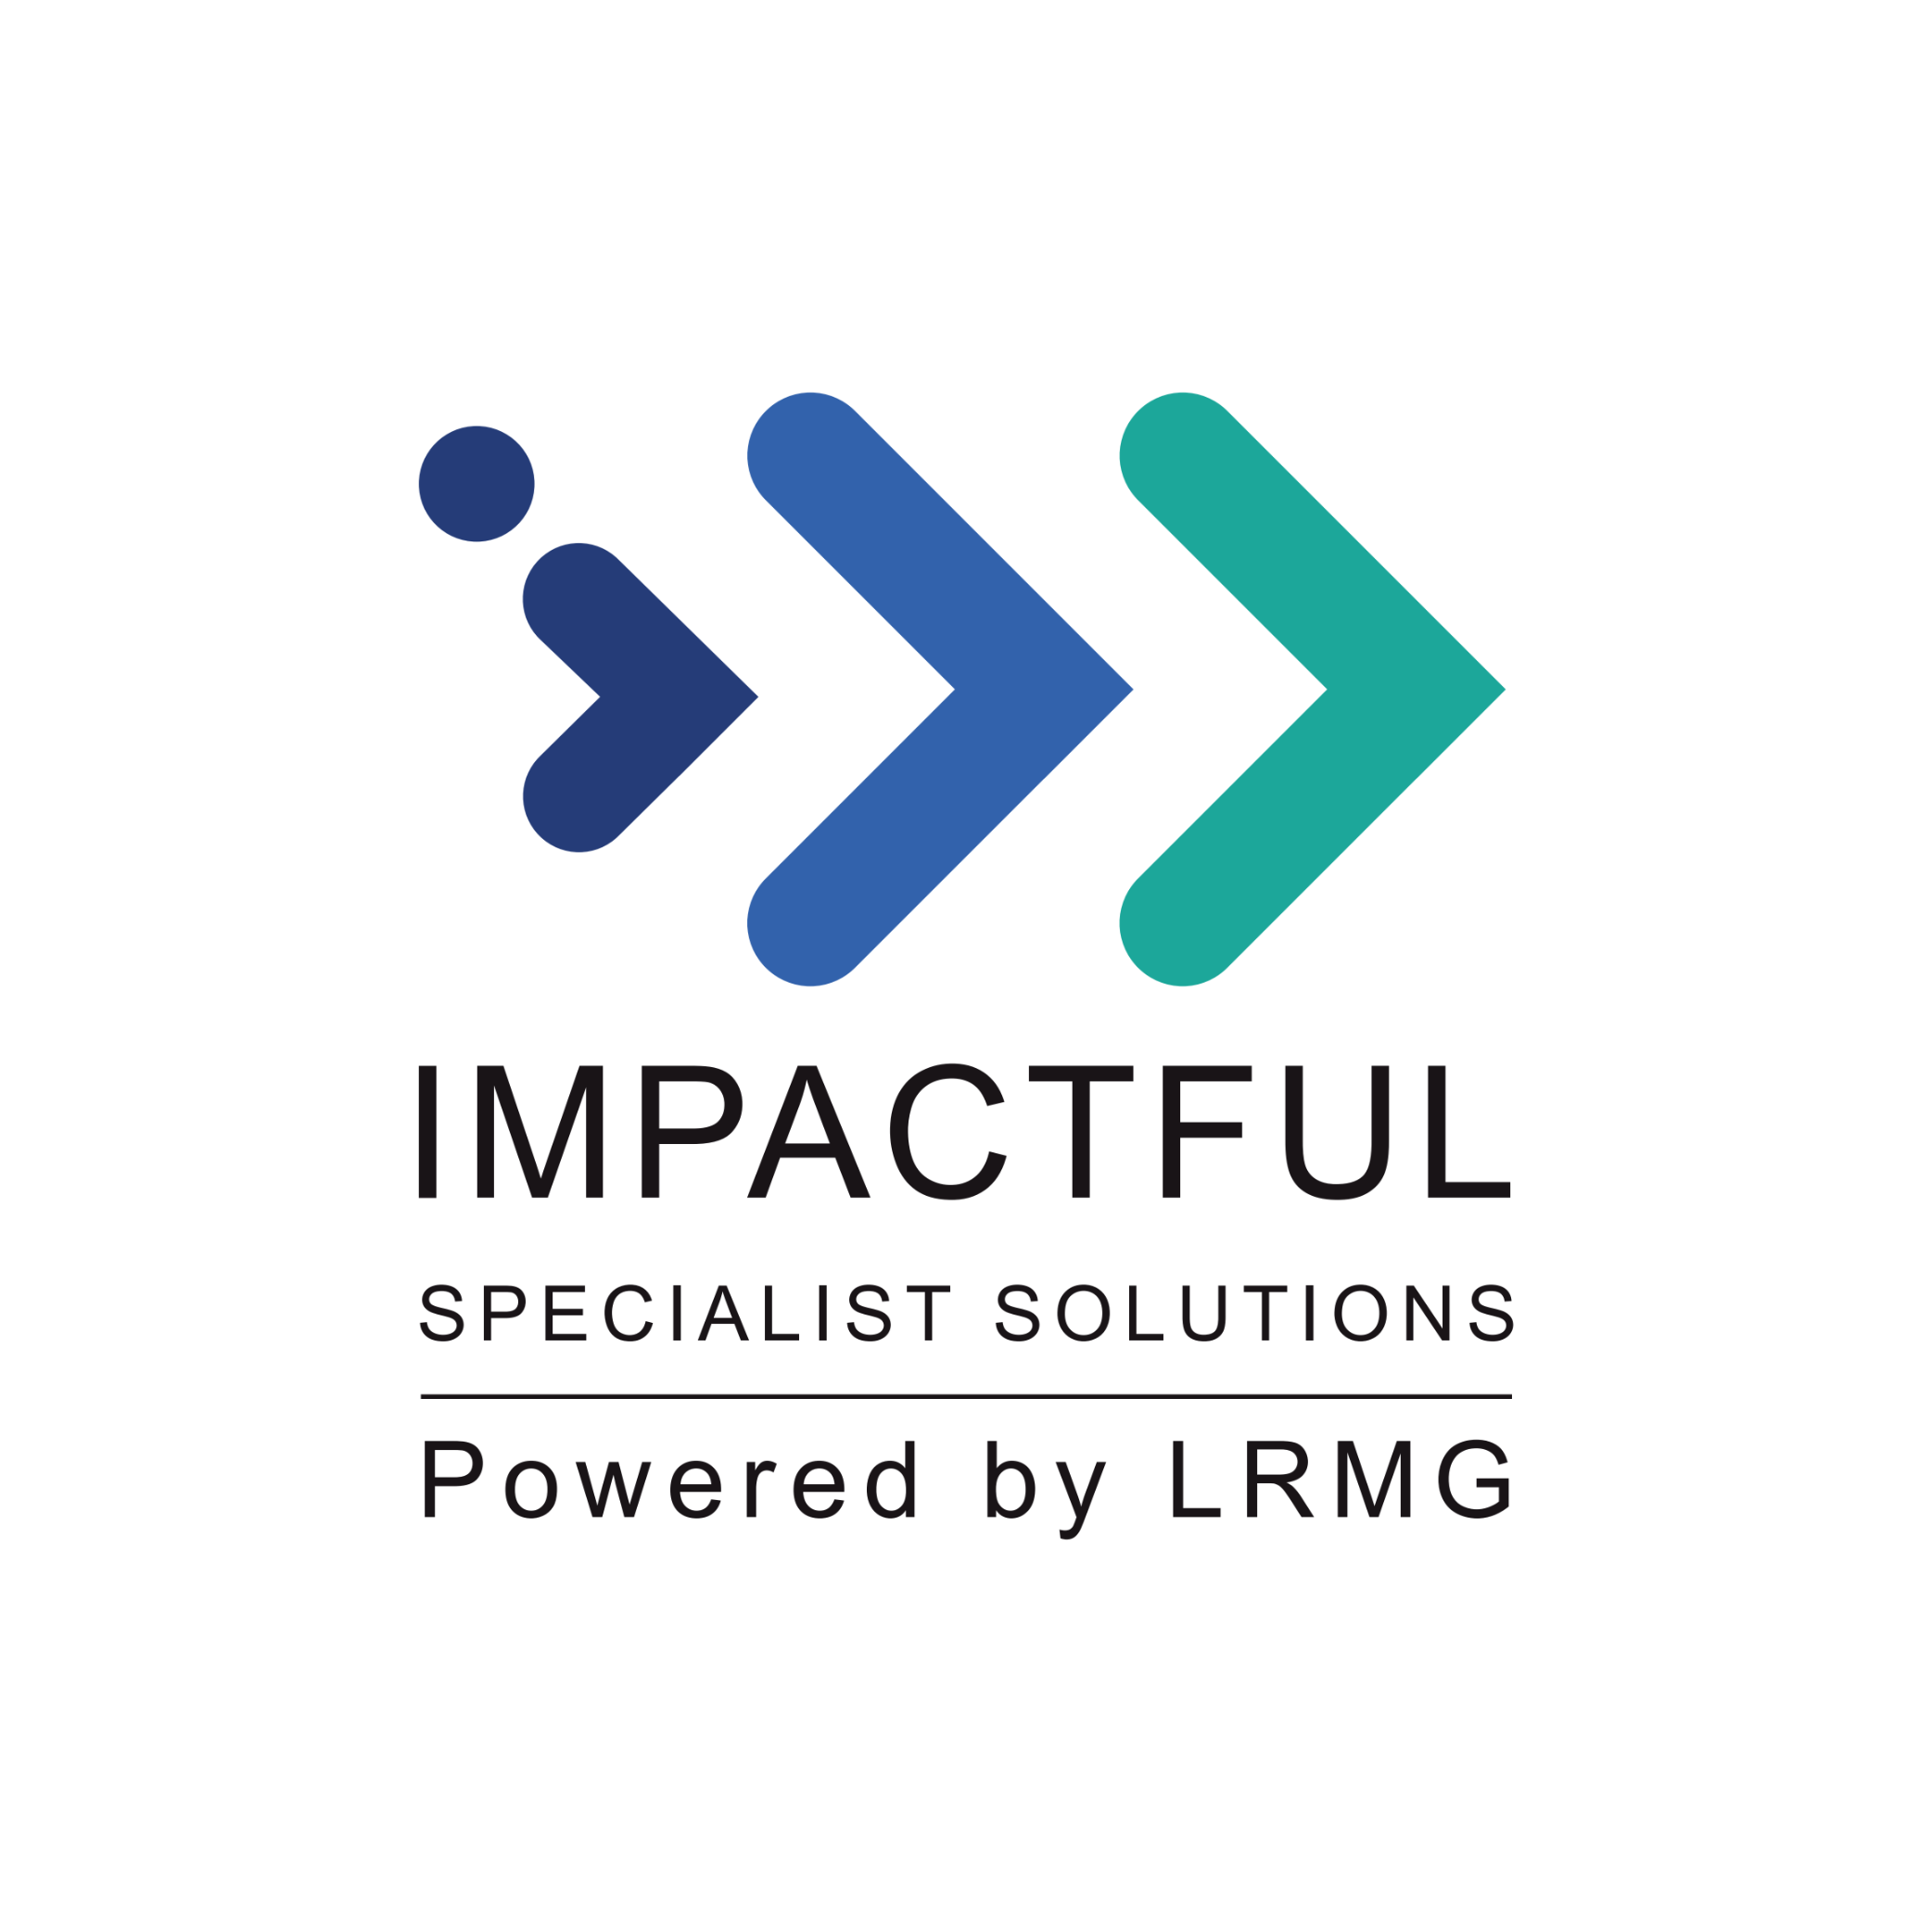 Impactful Specialist Solutions